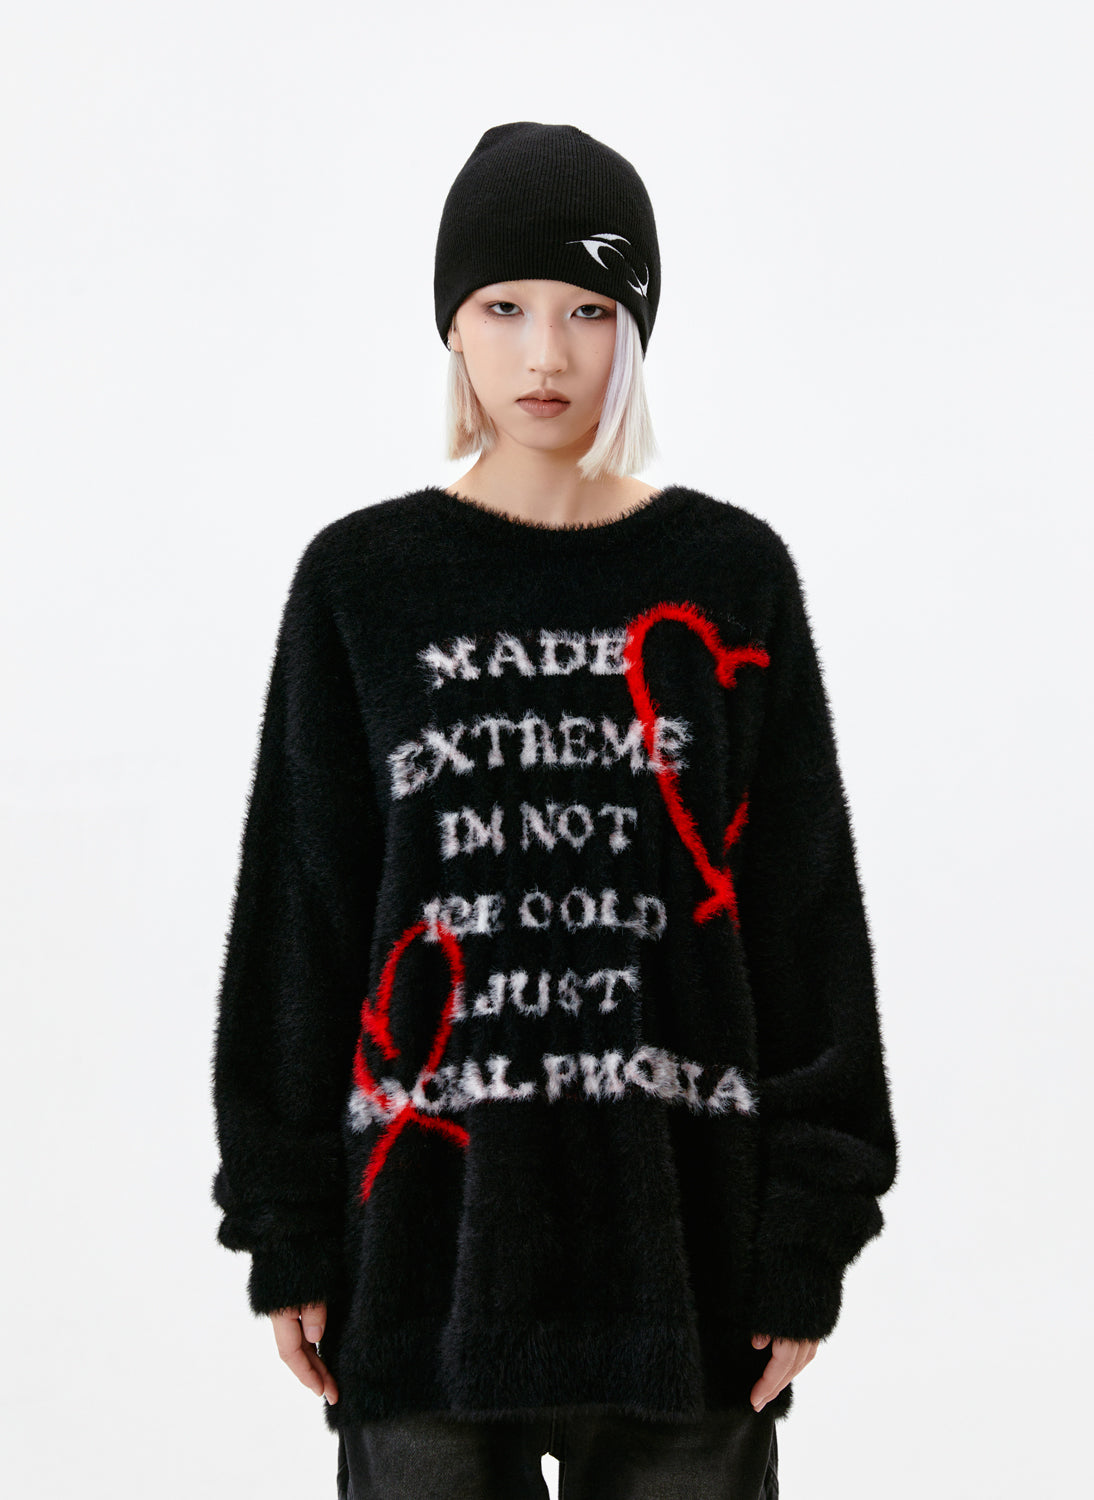 I'M NOT ICE COLD, I JUST SOCIAL PHOBIA KNITWEAR